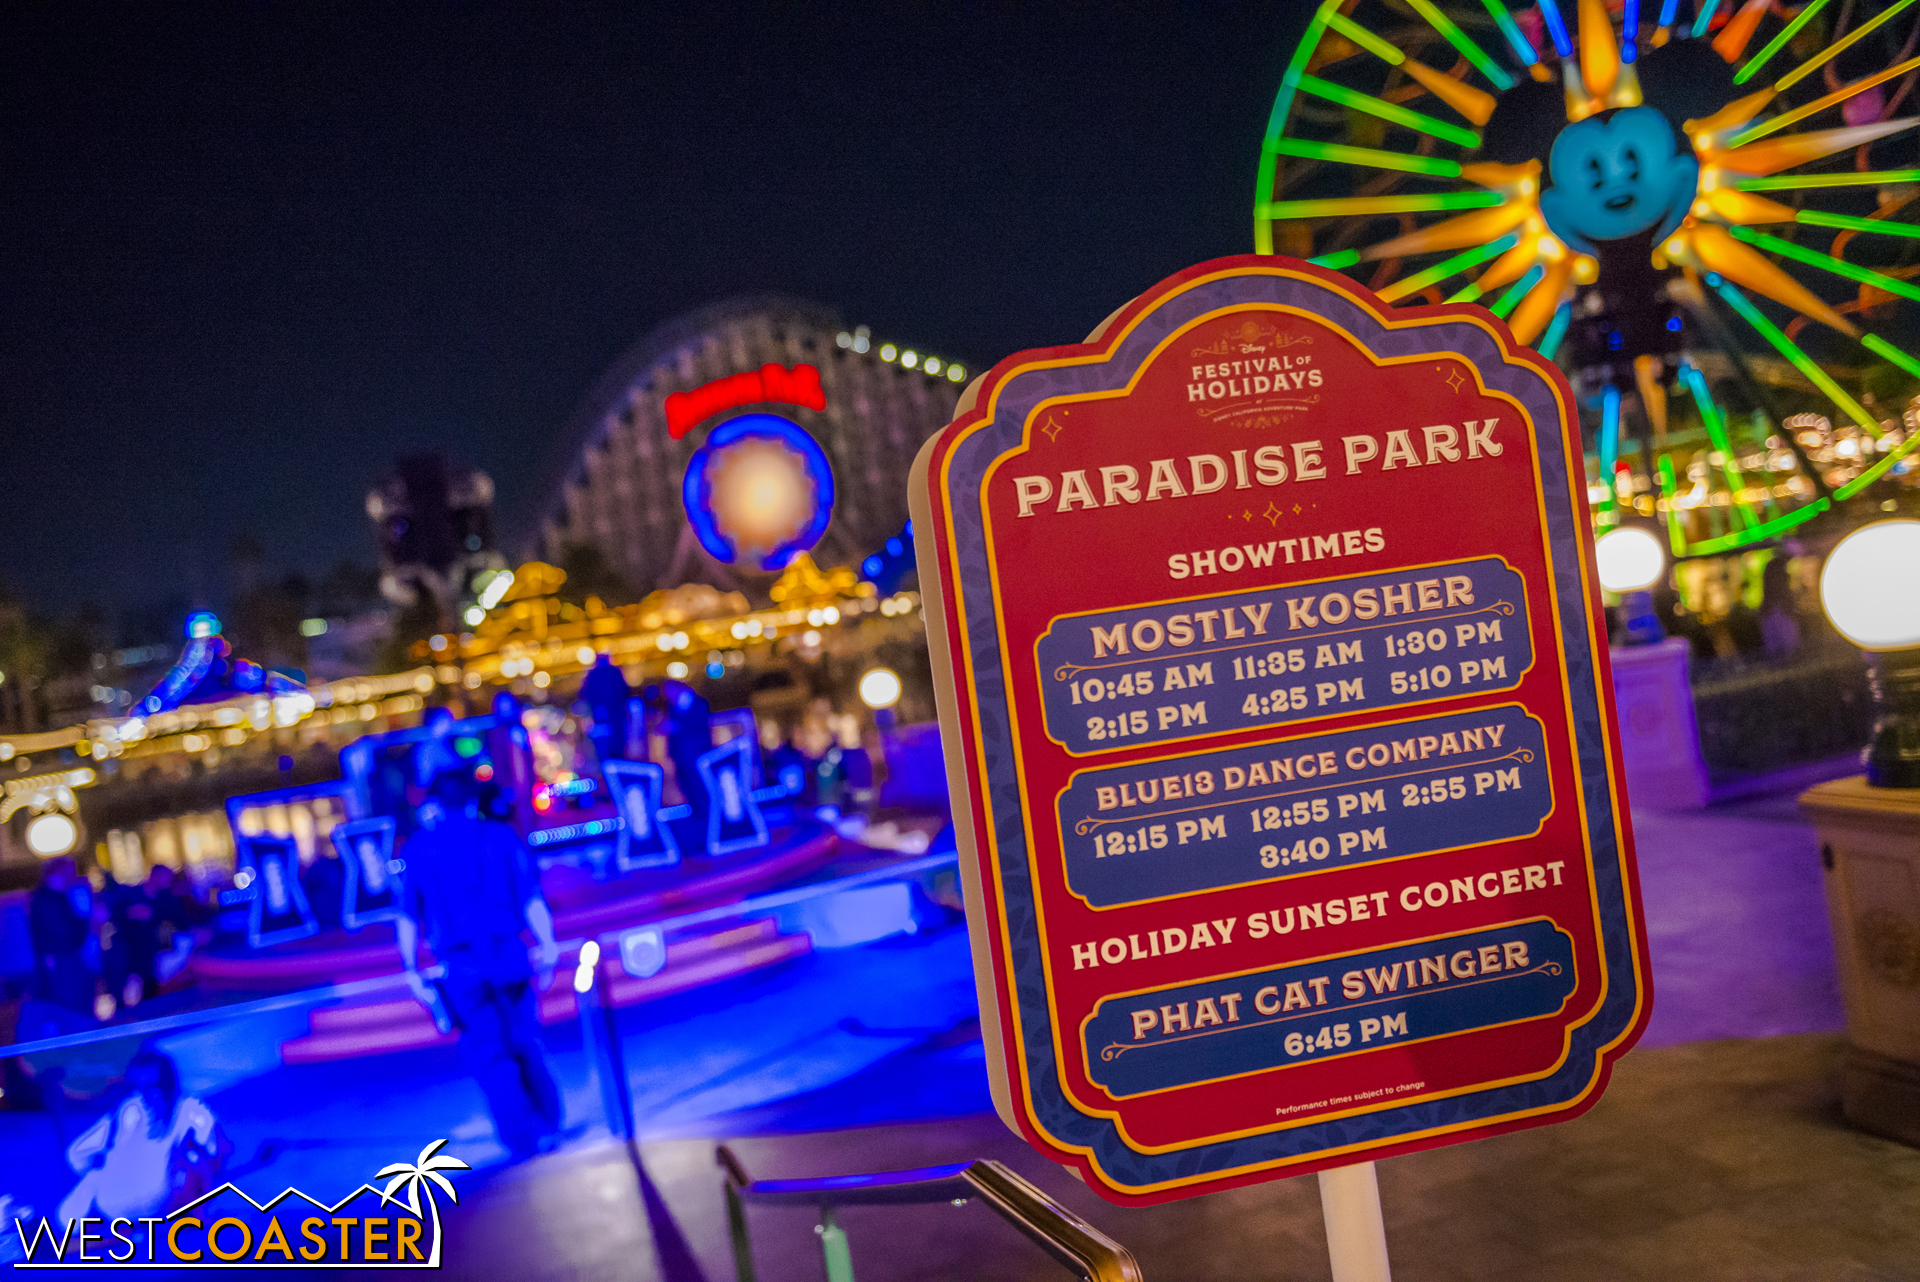  More entertainment can be found at the Paradise Park stage. 